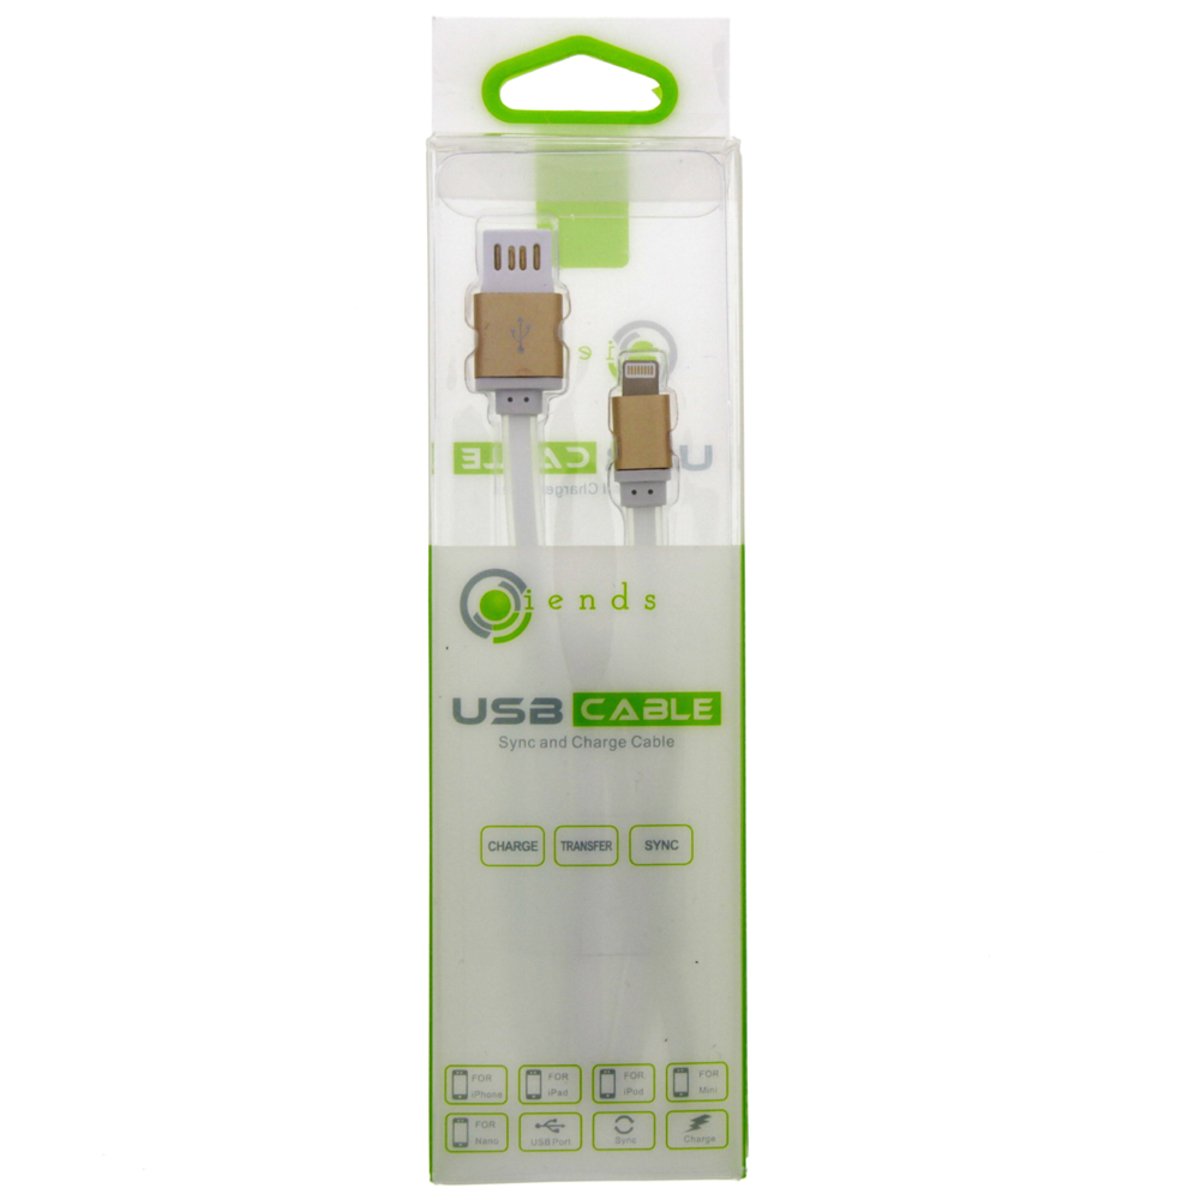 Iends Lightning Cable CA4246 1M